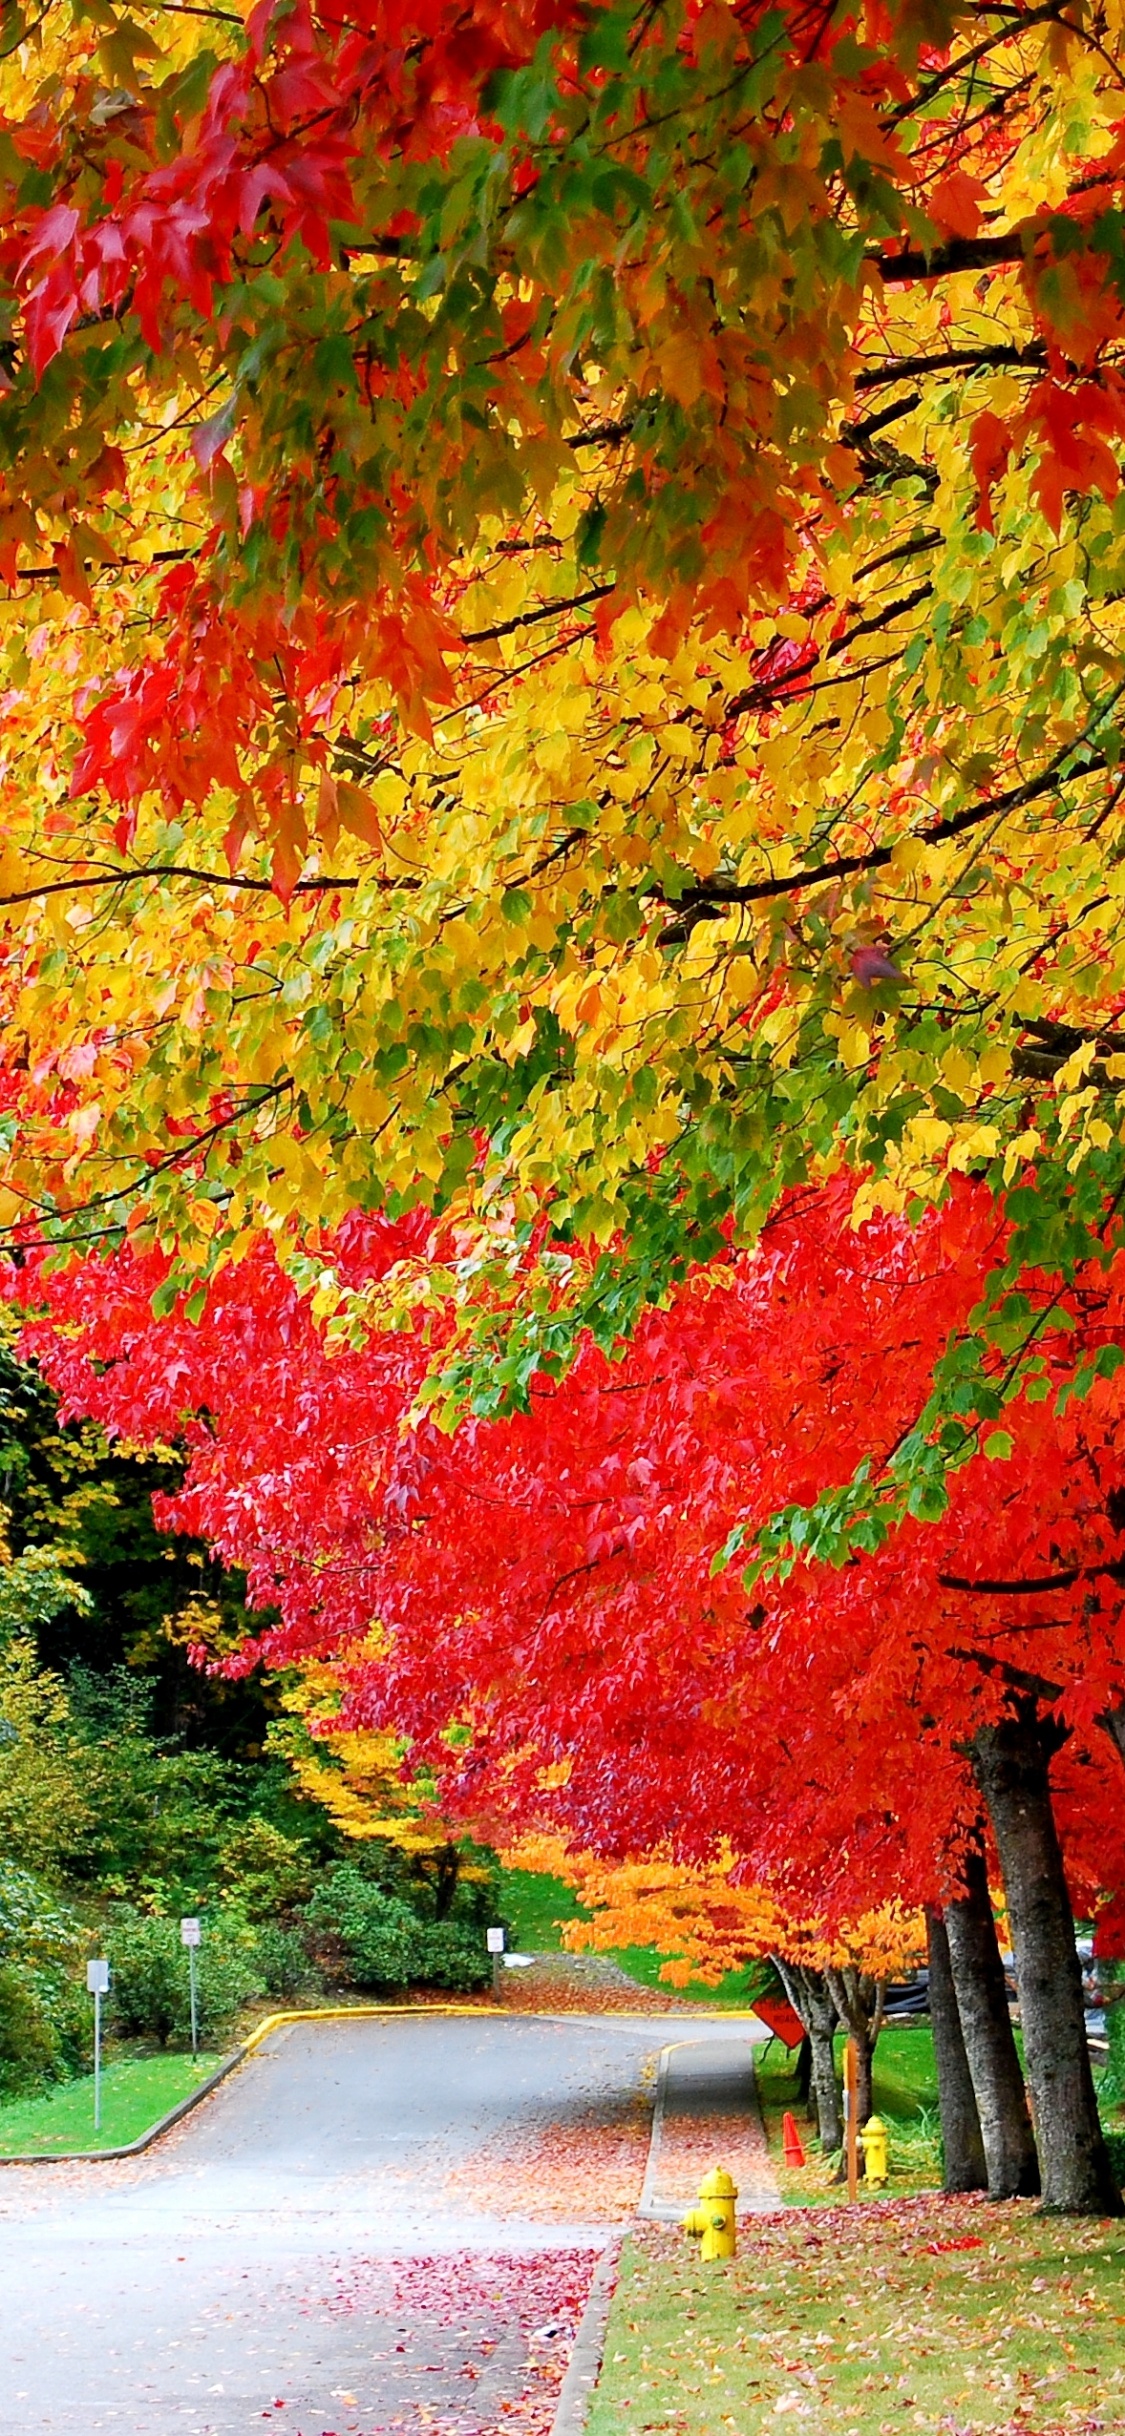 Red and Yellow Leaves on The Road. Wallpaper in 1125x2436 Resolution